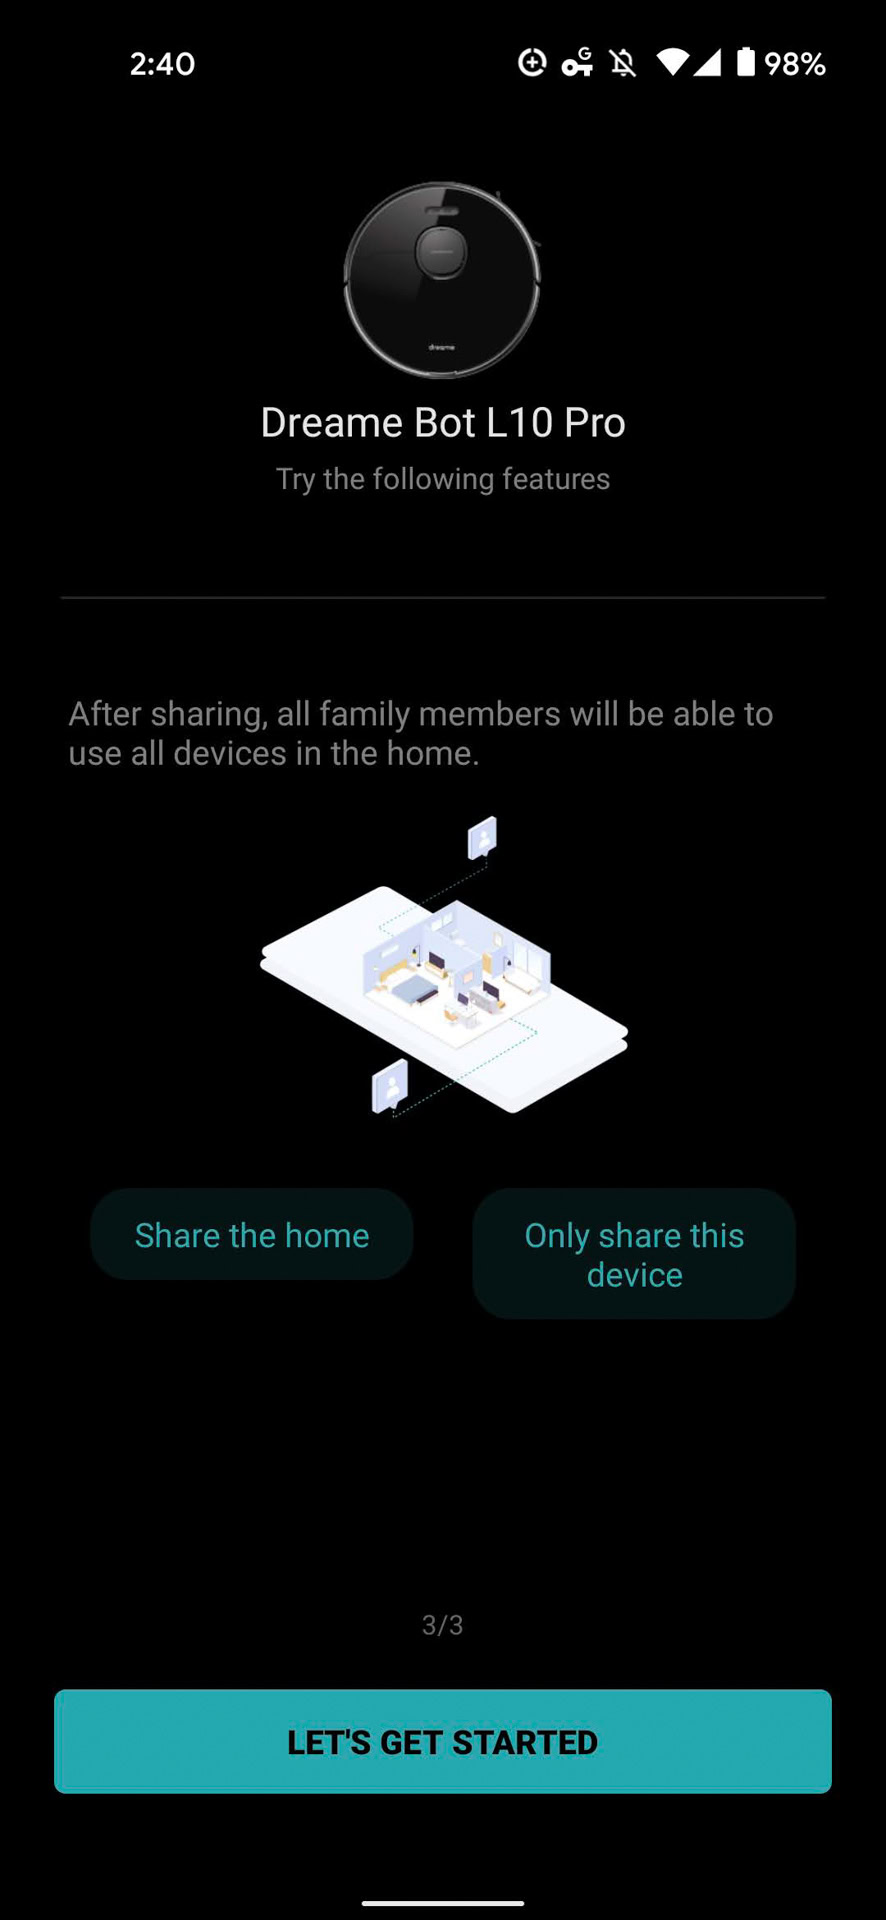 Dreame Bot L10 Pro home sharing